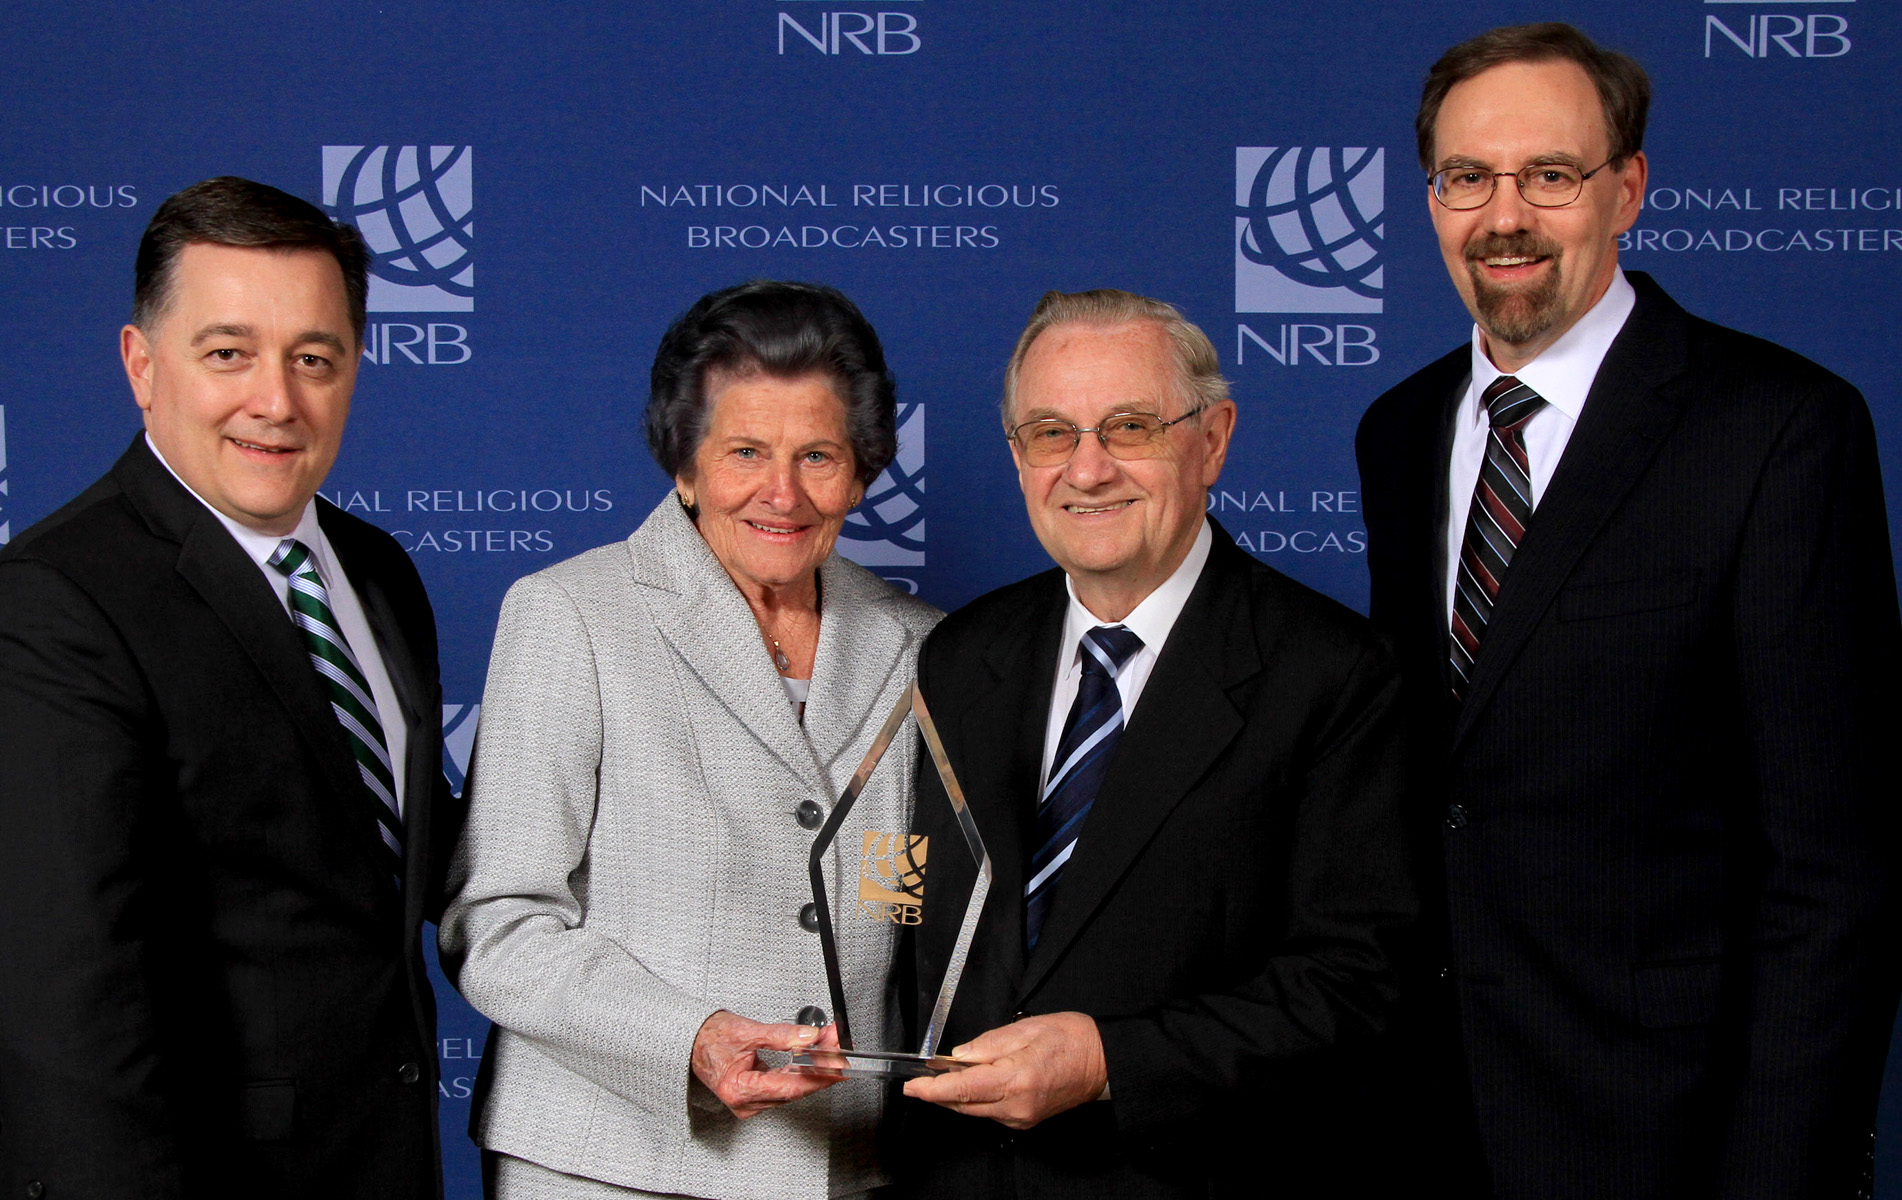 Portuguese radio program producers Victor and Helena Arndt receive a 50-year Milestone Award from NRB President Jerry Johnson (left) and Bill Blount, chairman of the NRB executive committee.